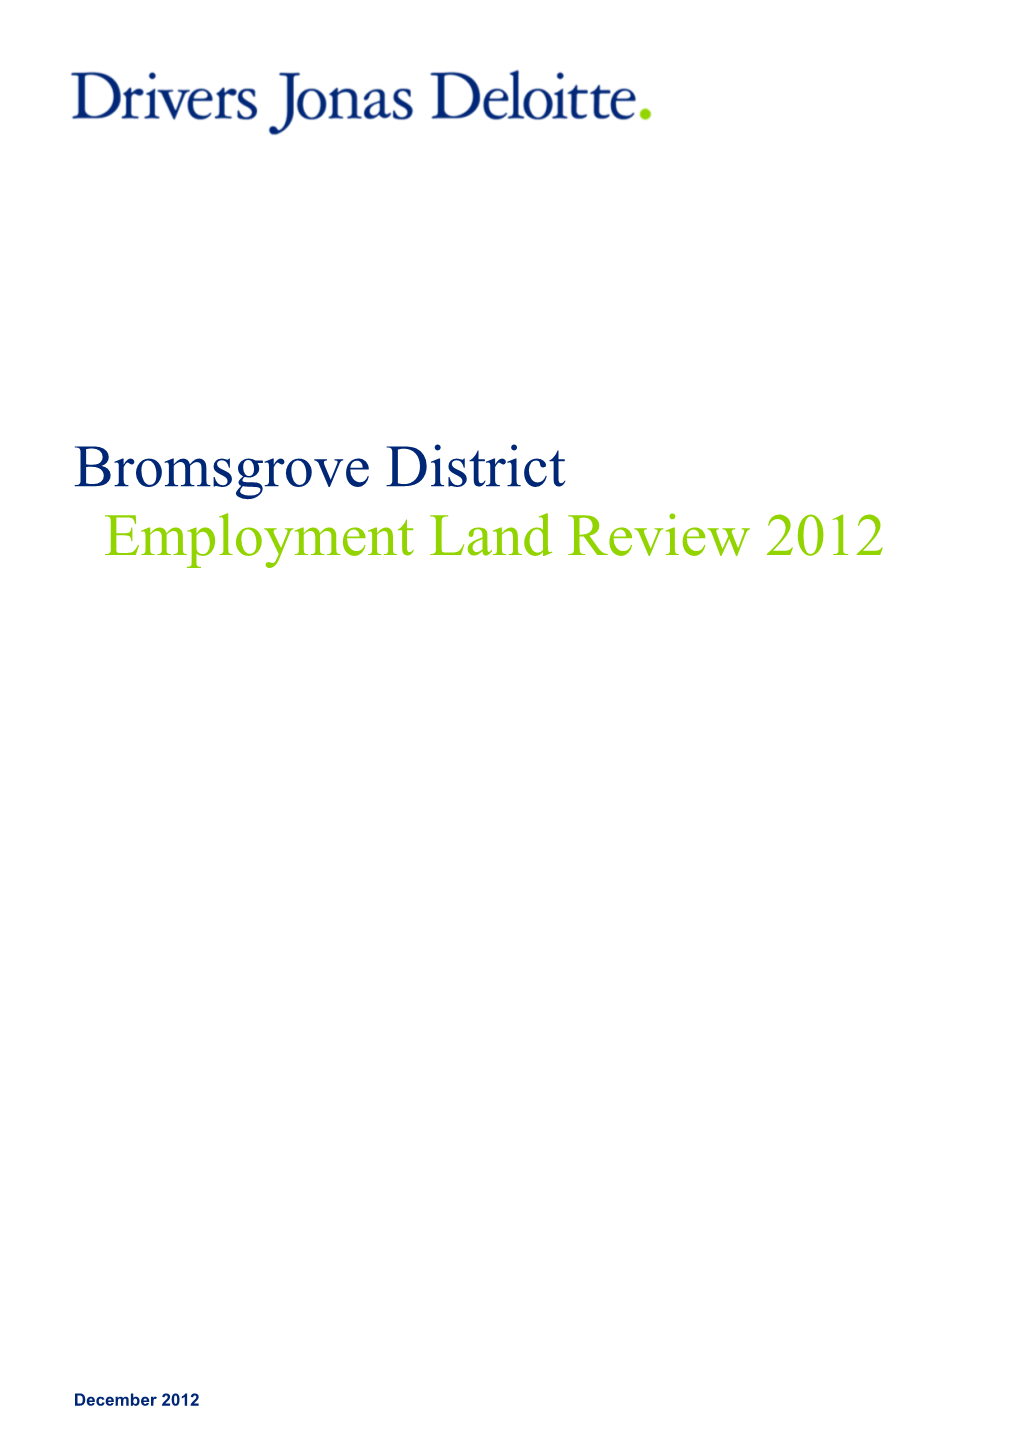 Employment Land Review 2012